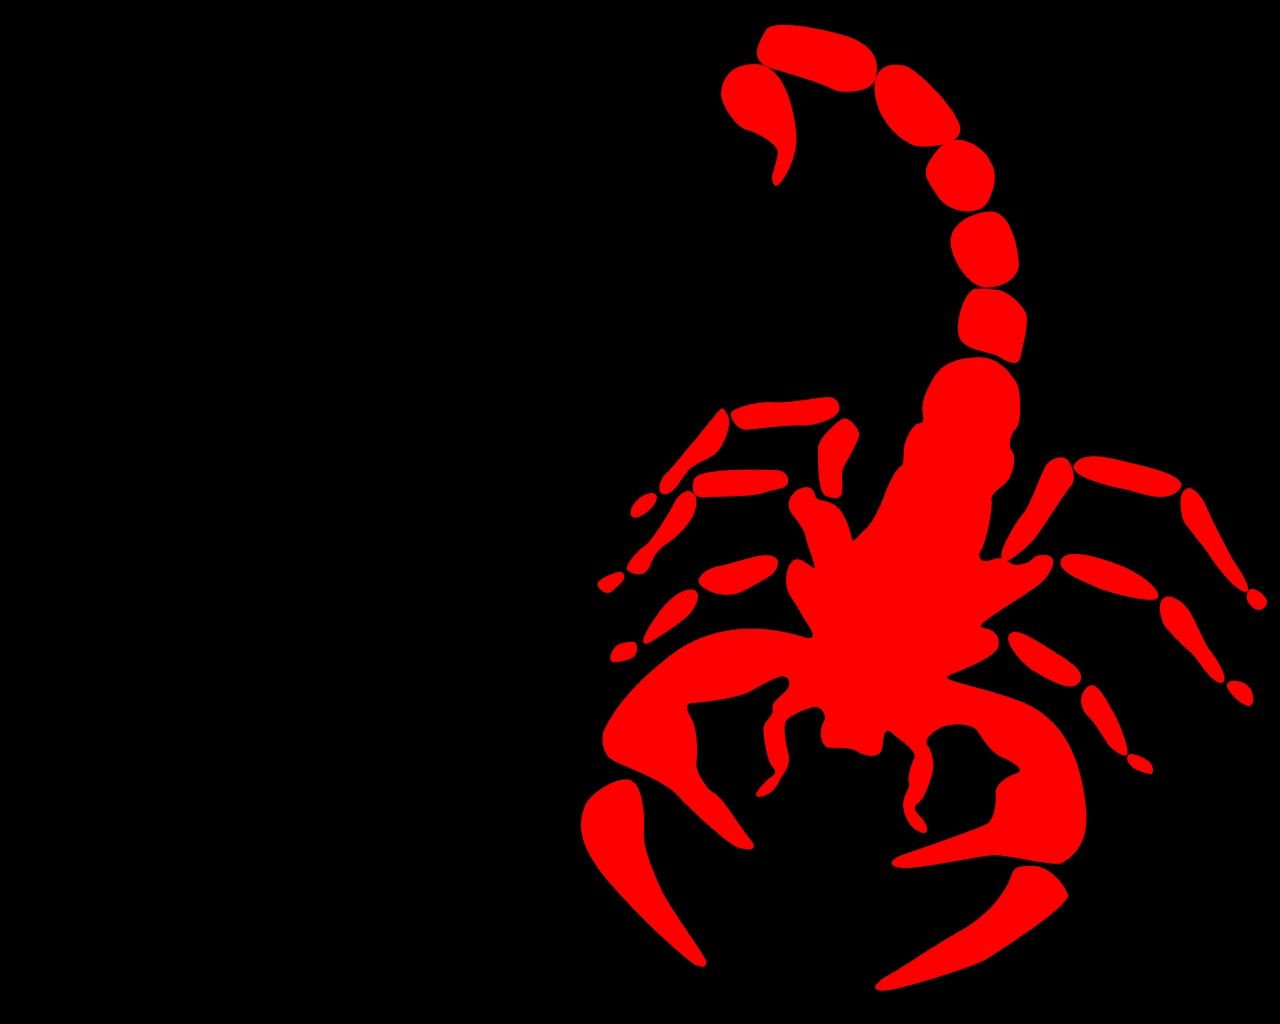 Black Scorpion Images Wallpapers